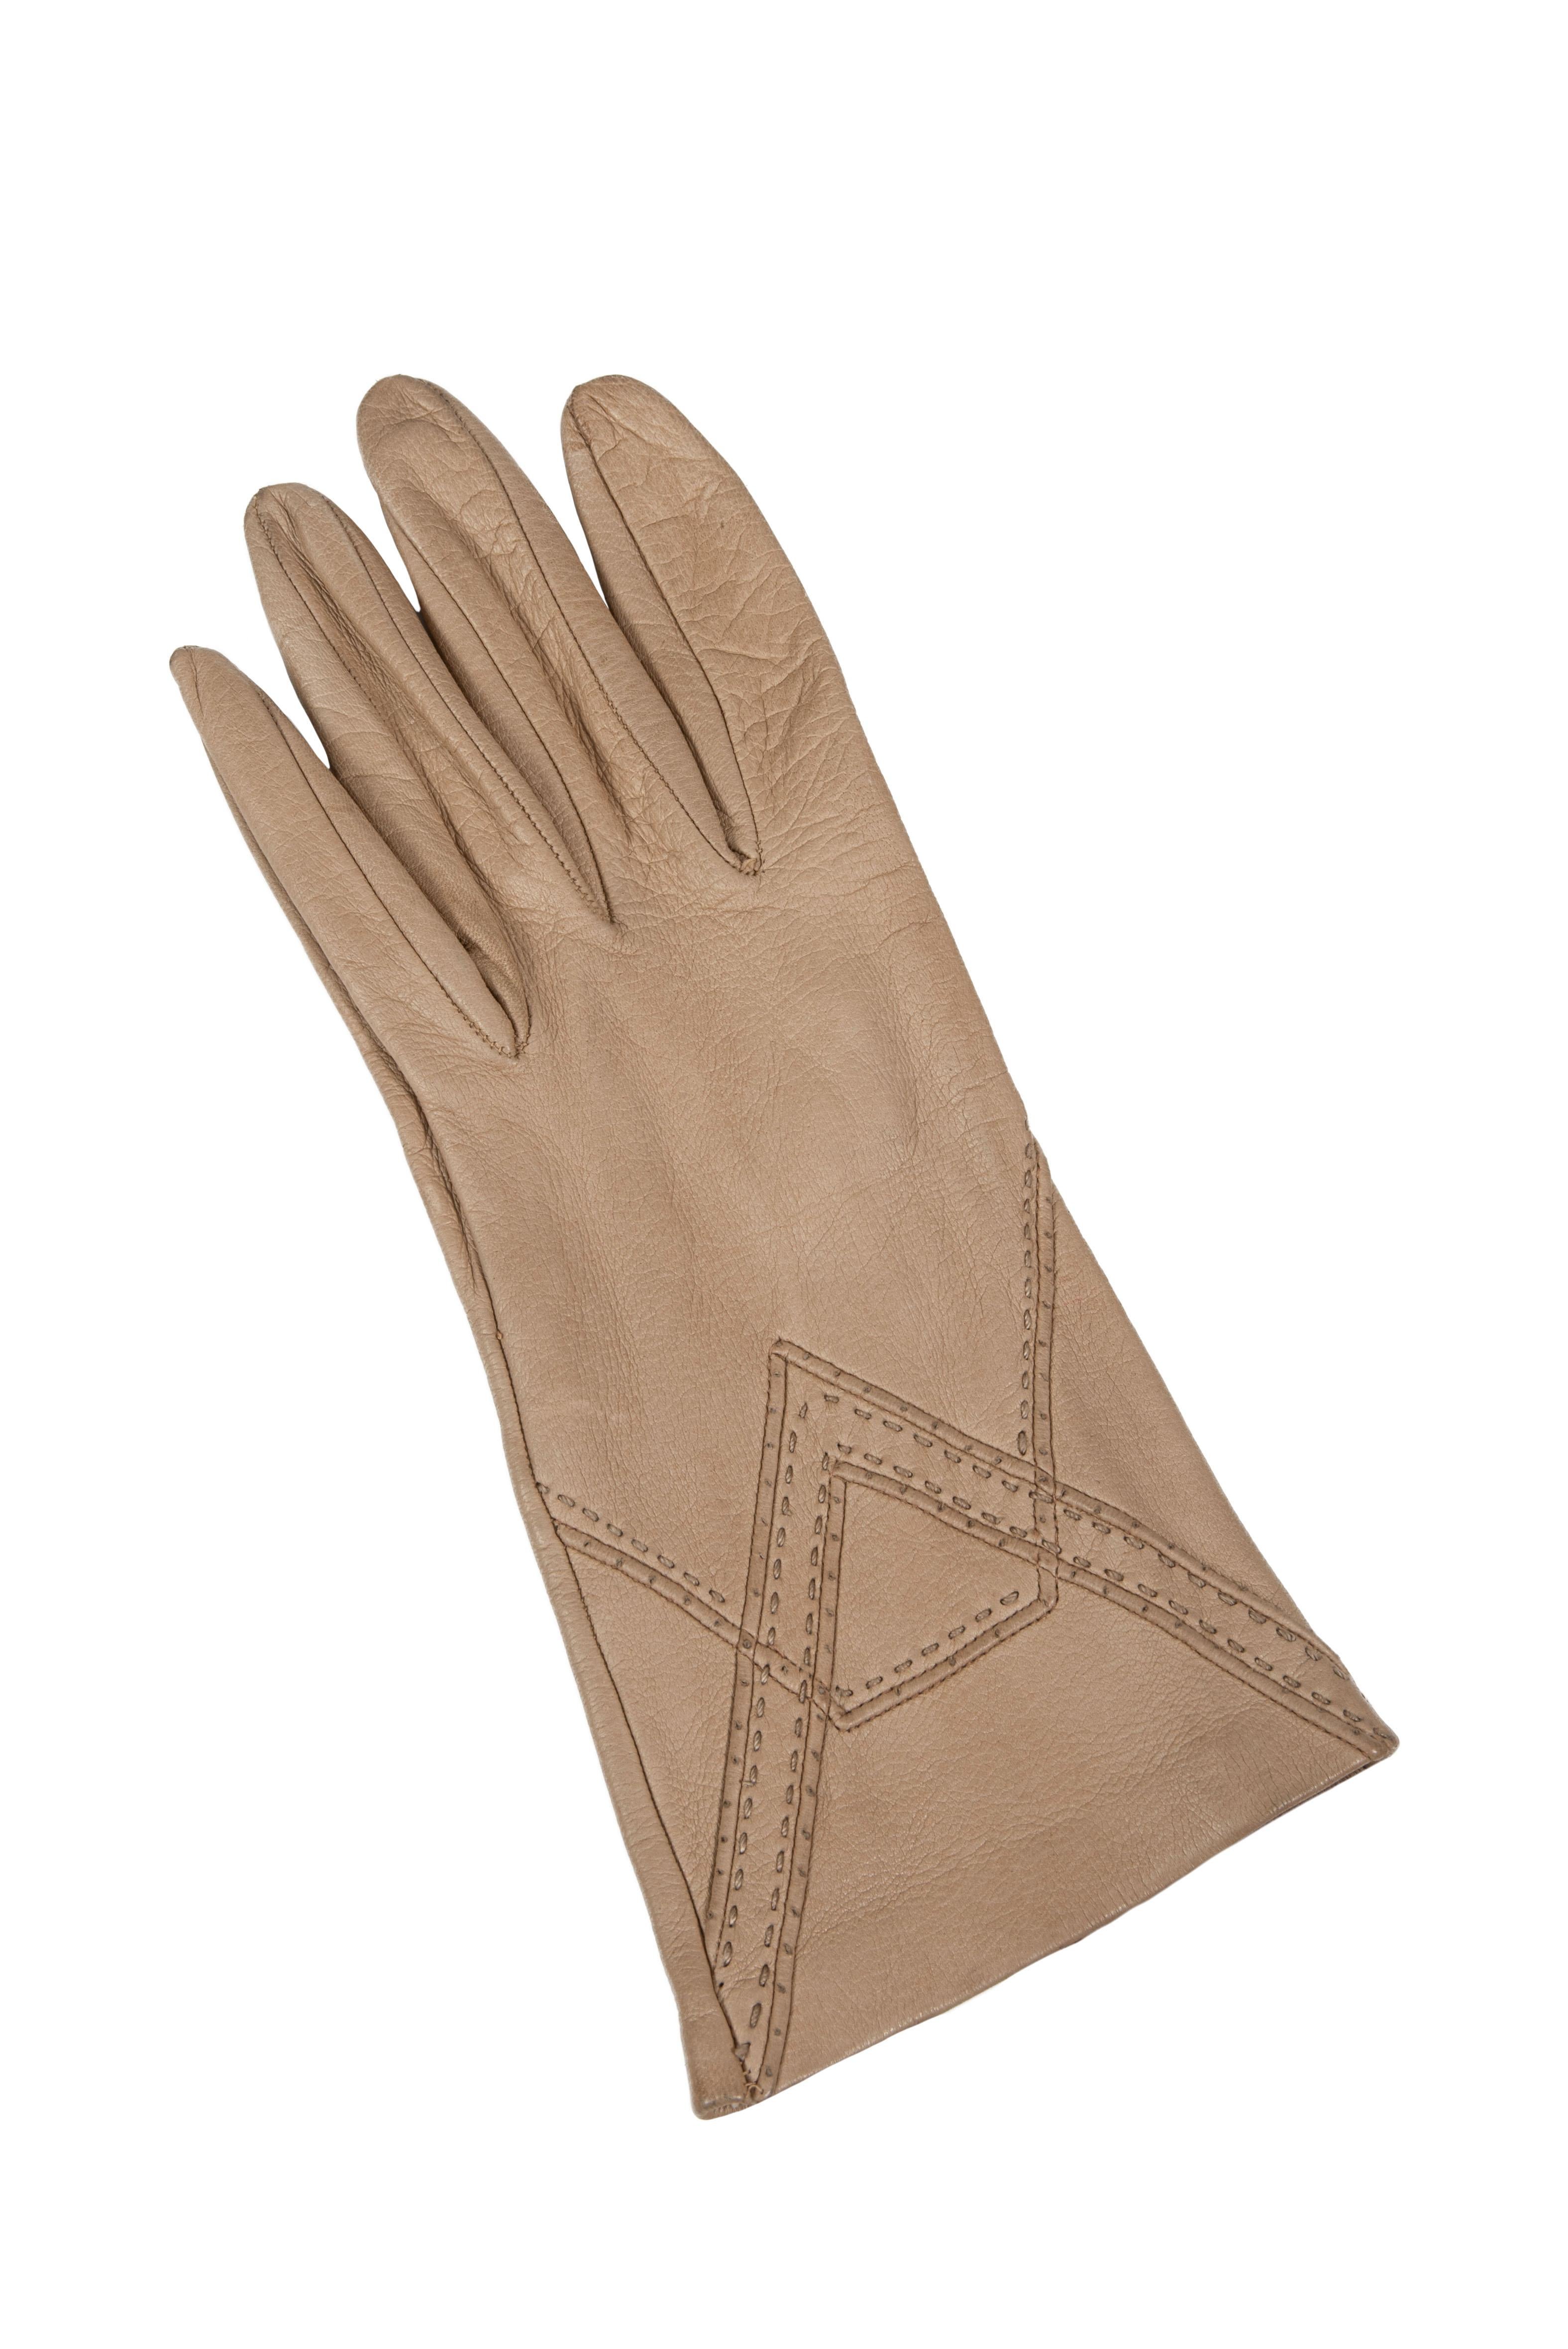 Women's Caffè Latte Beige Smooth Leather Gloves with Geometric Stitching, 1960s For Sale